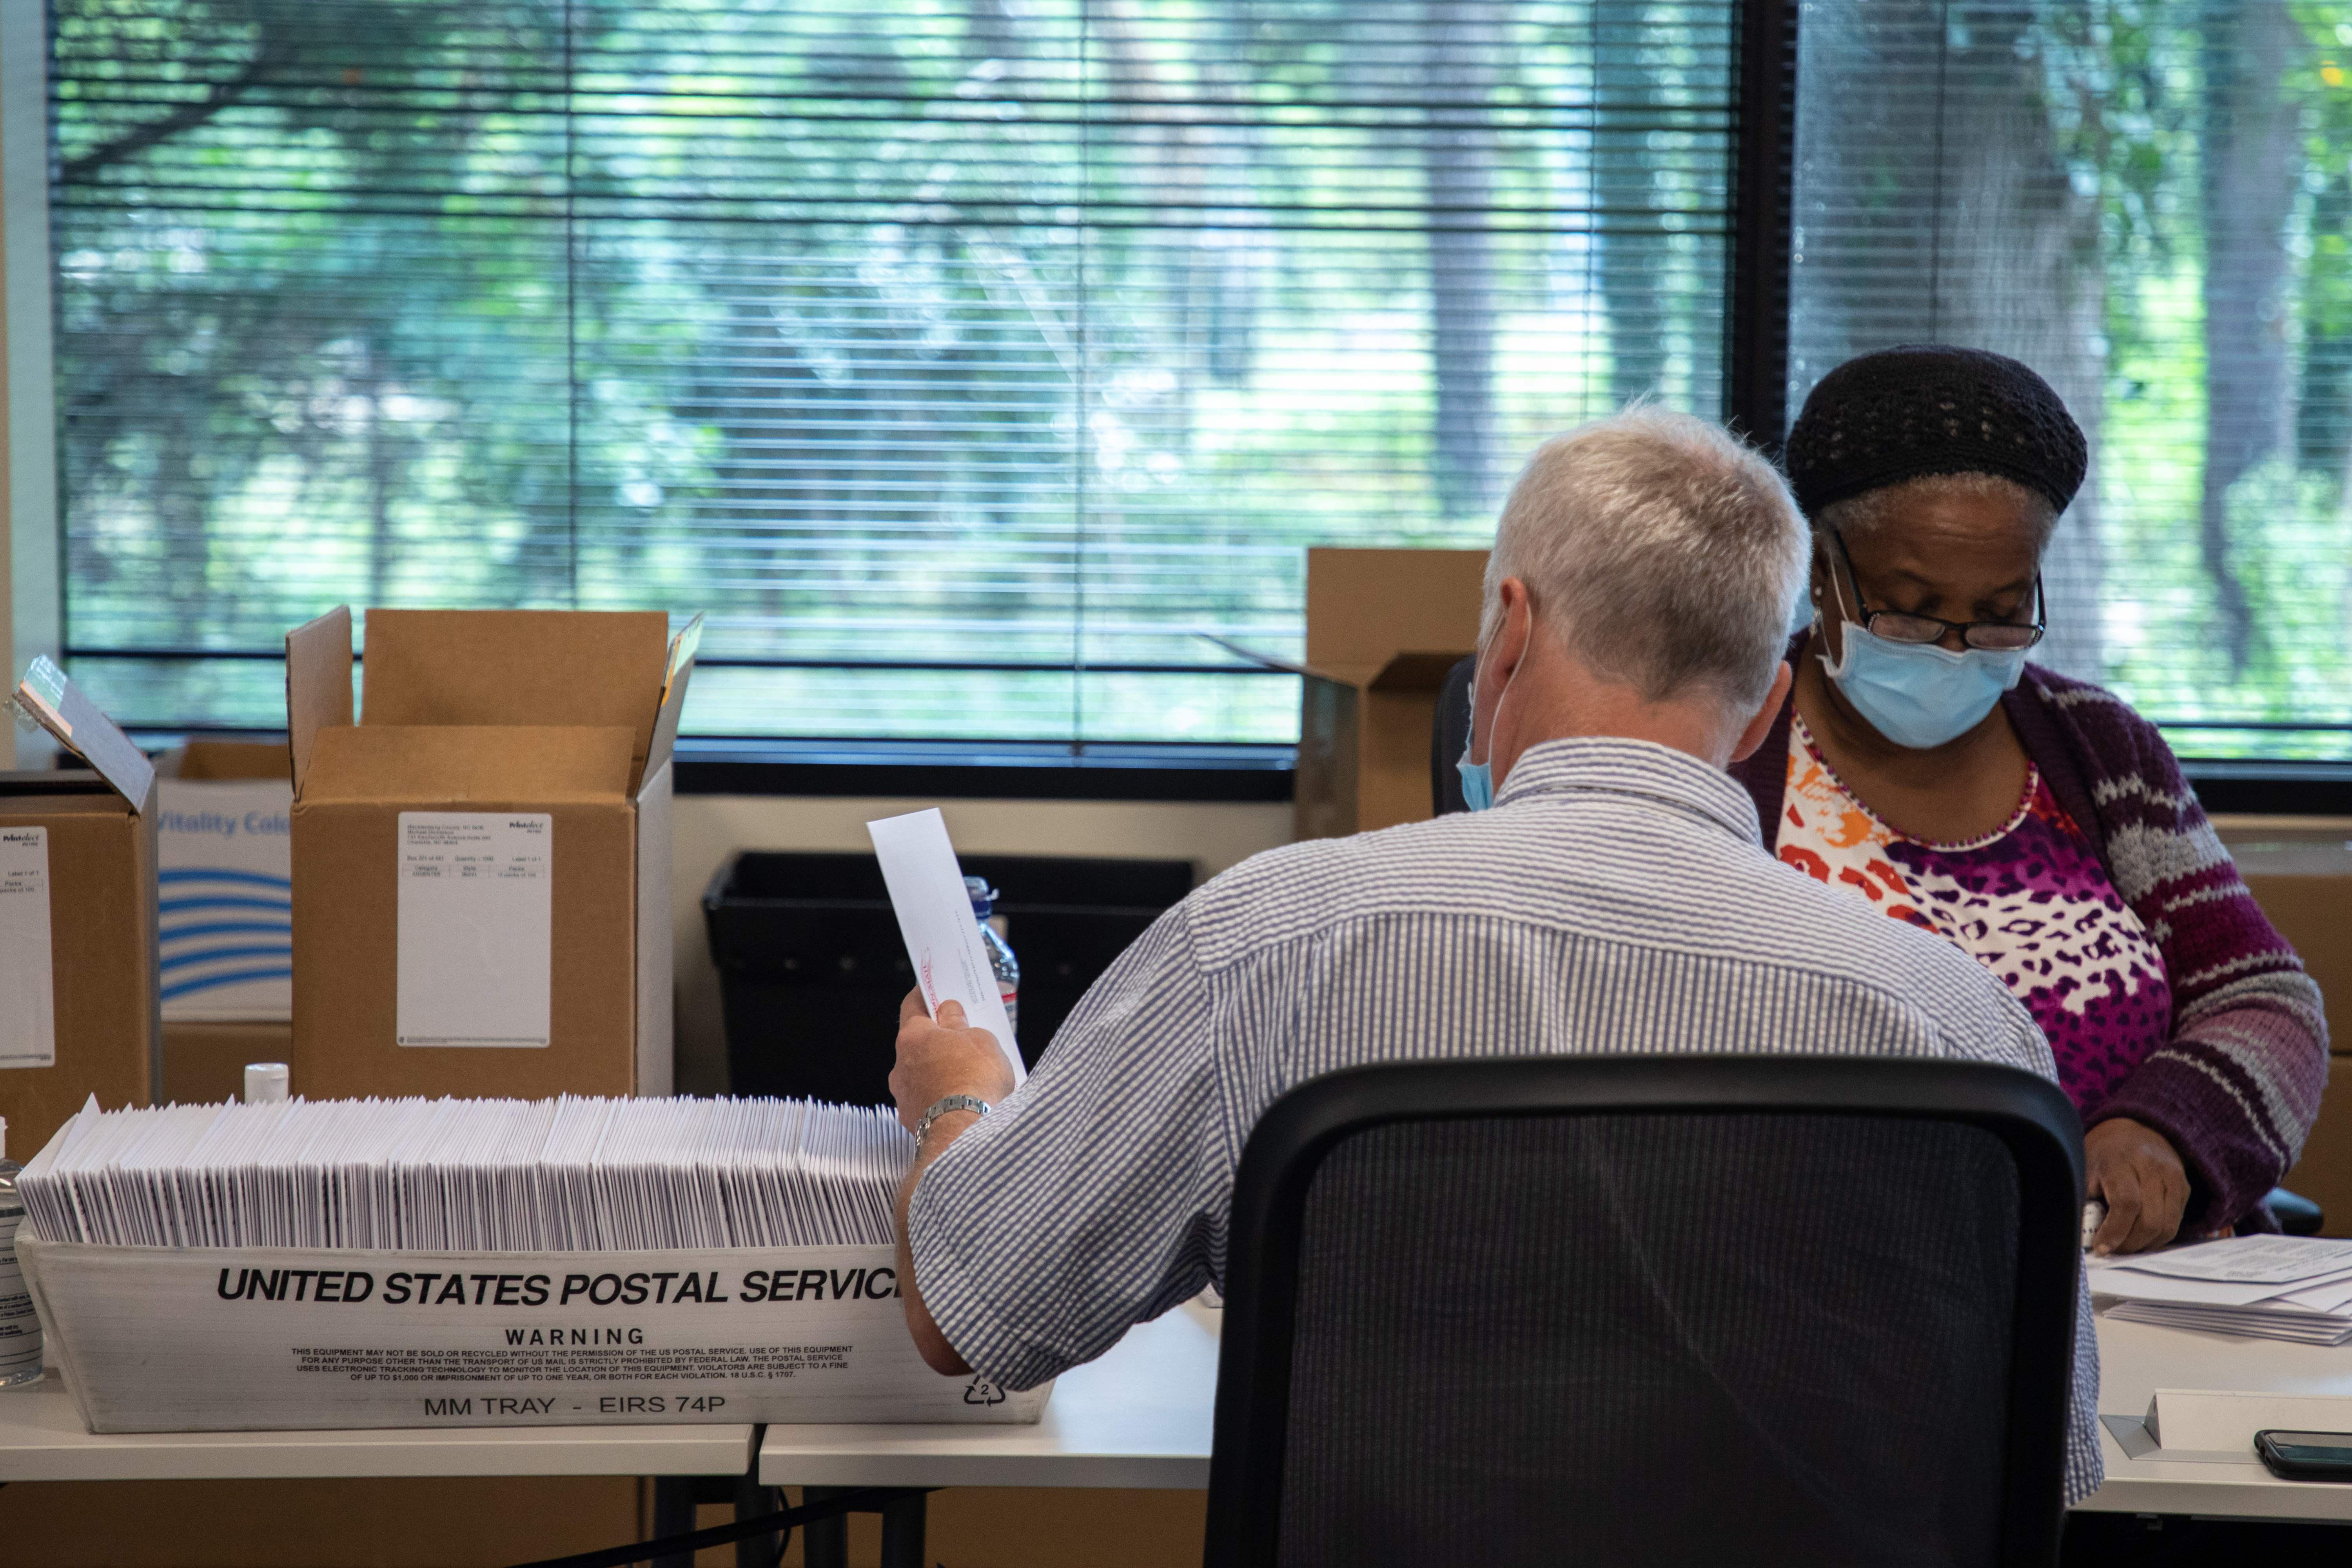 Two election officials sit at a table with boxes of absentee ballot materials and USPS containers.